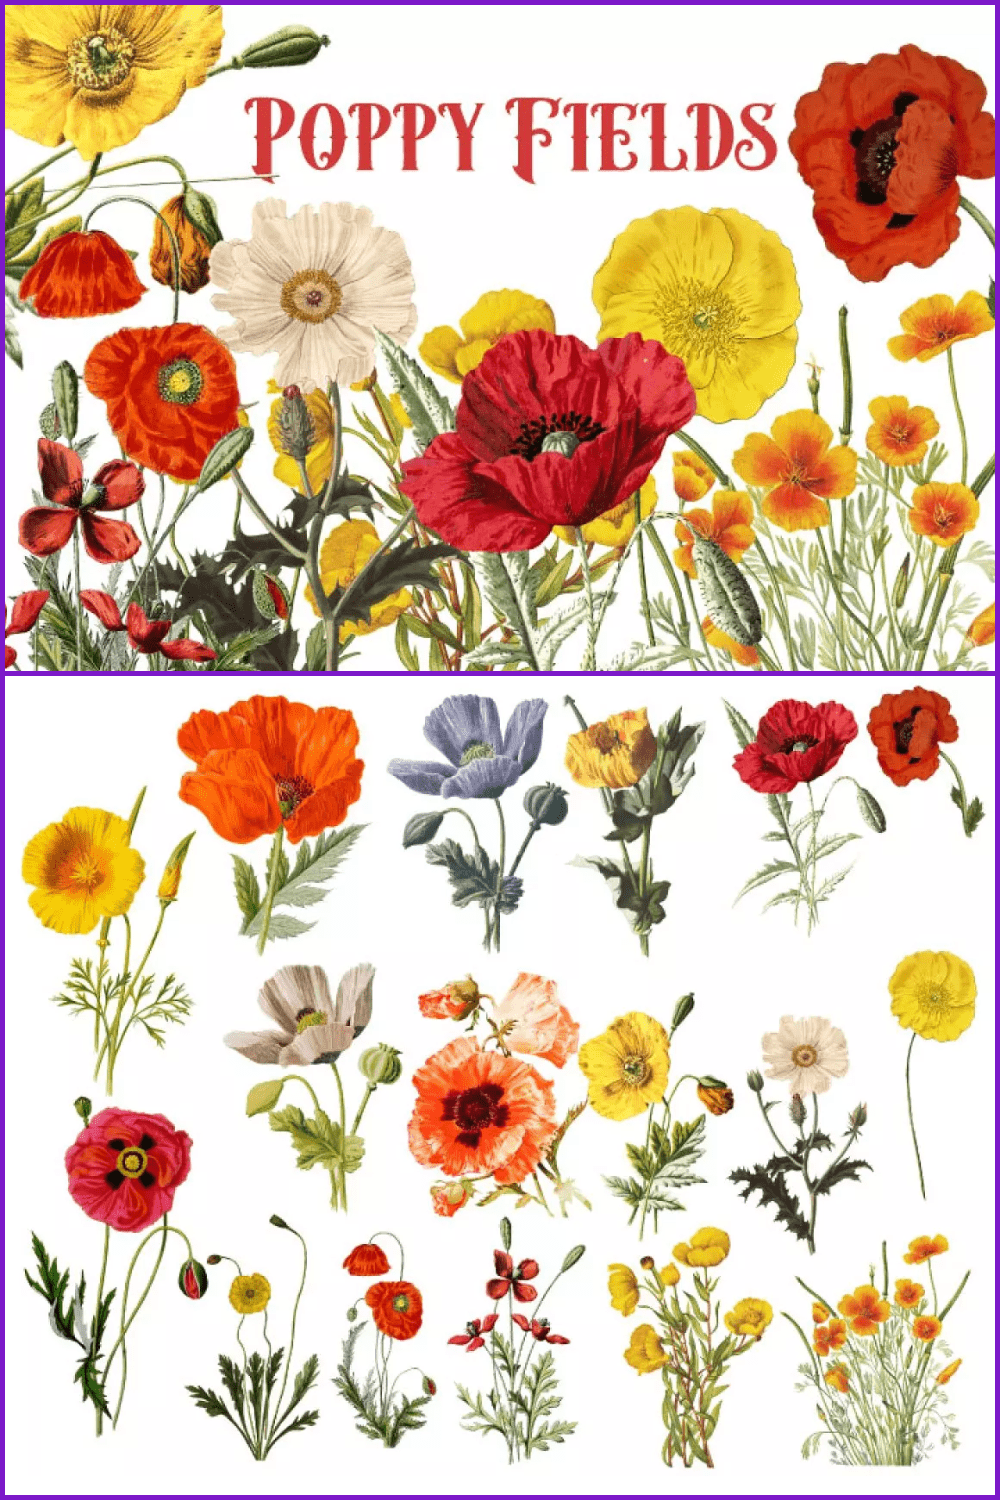 Colorful poppy field in vintage style.